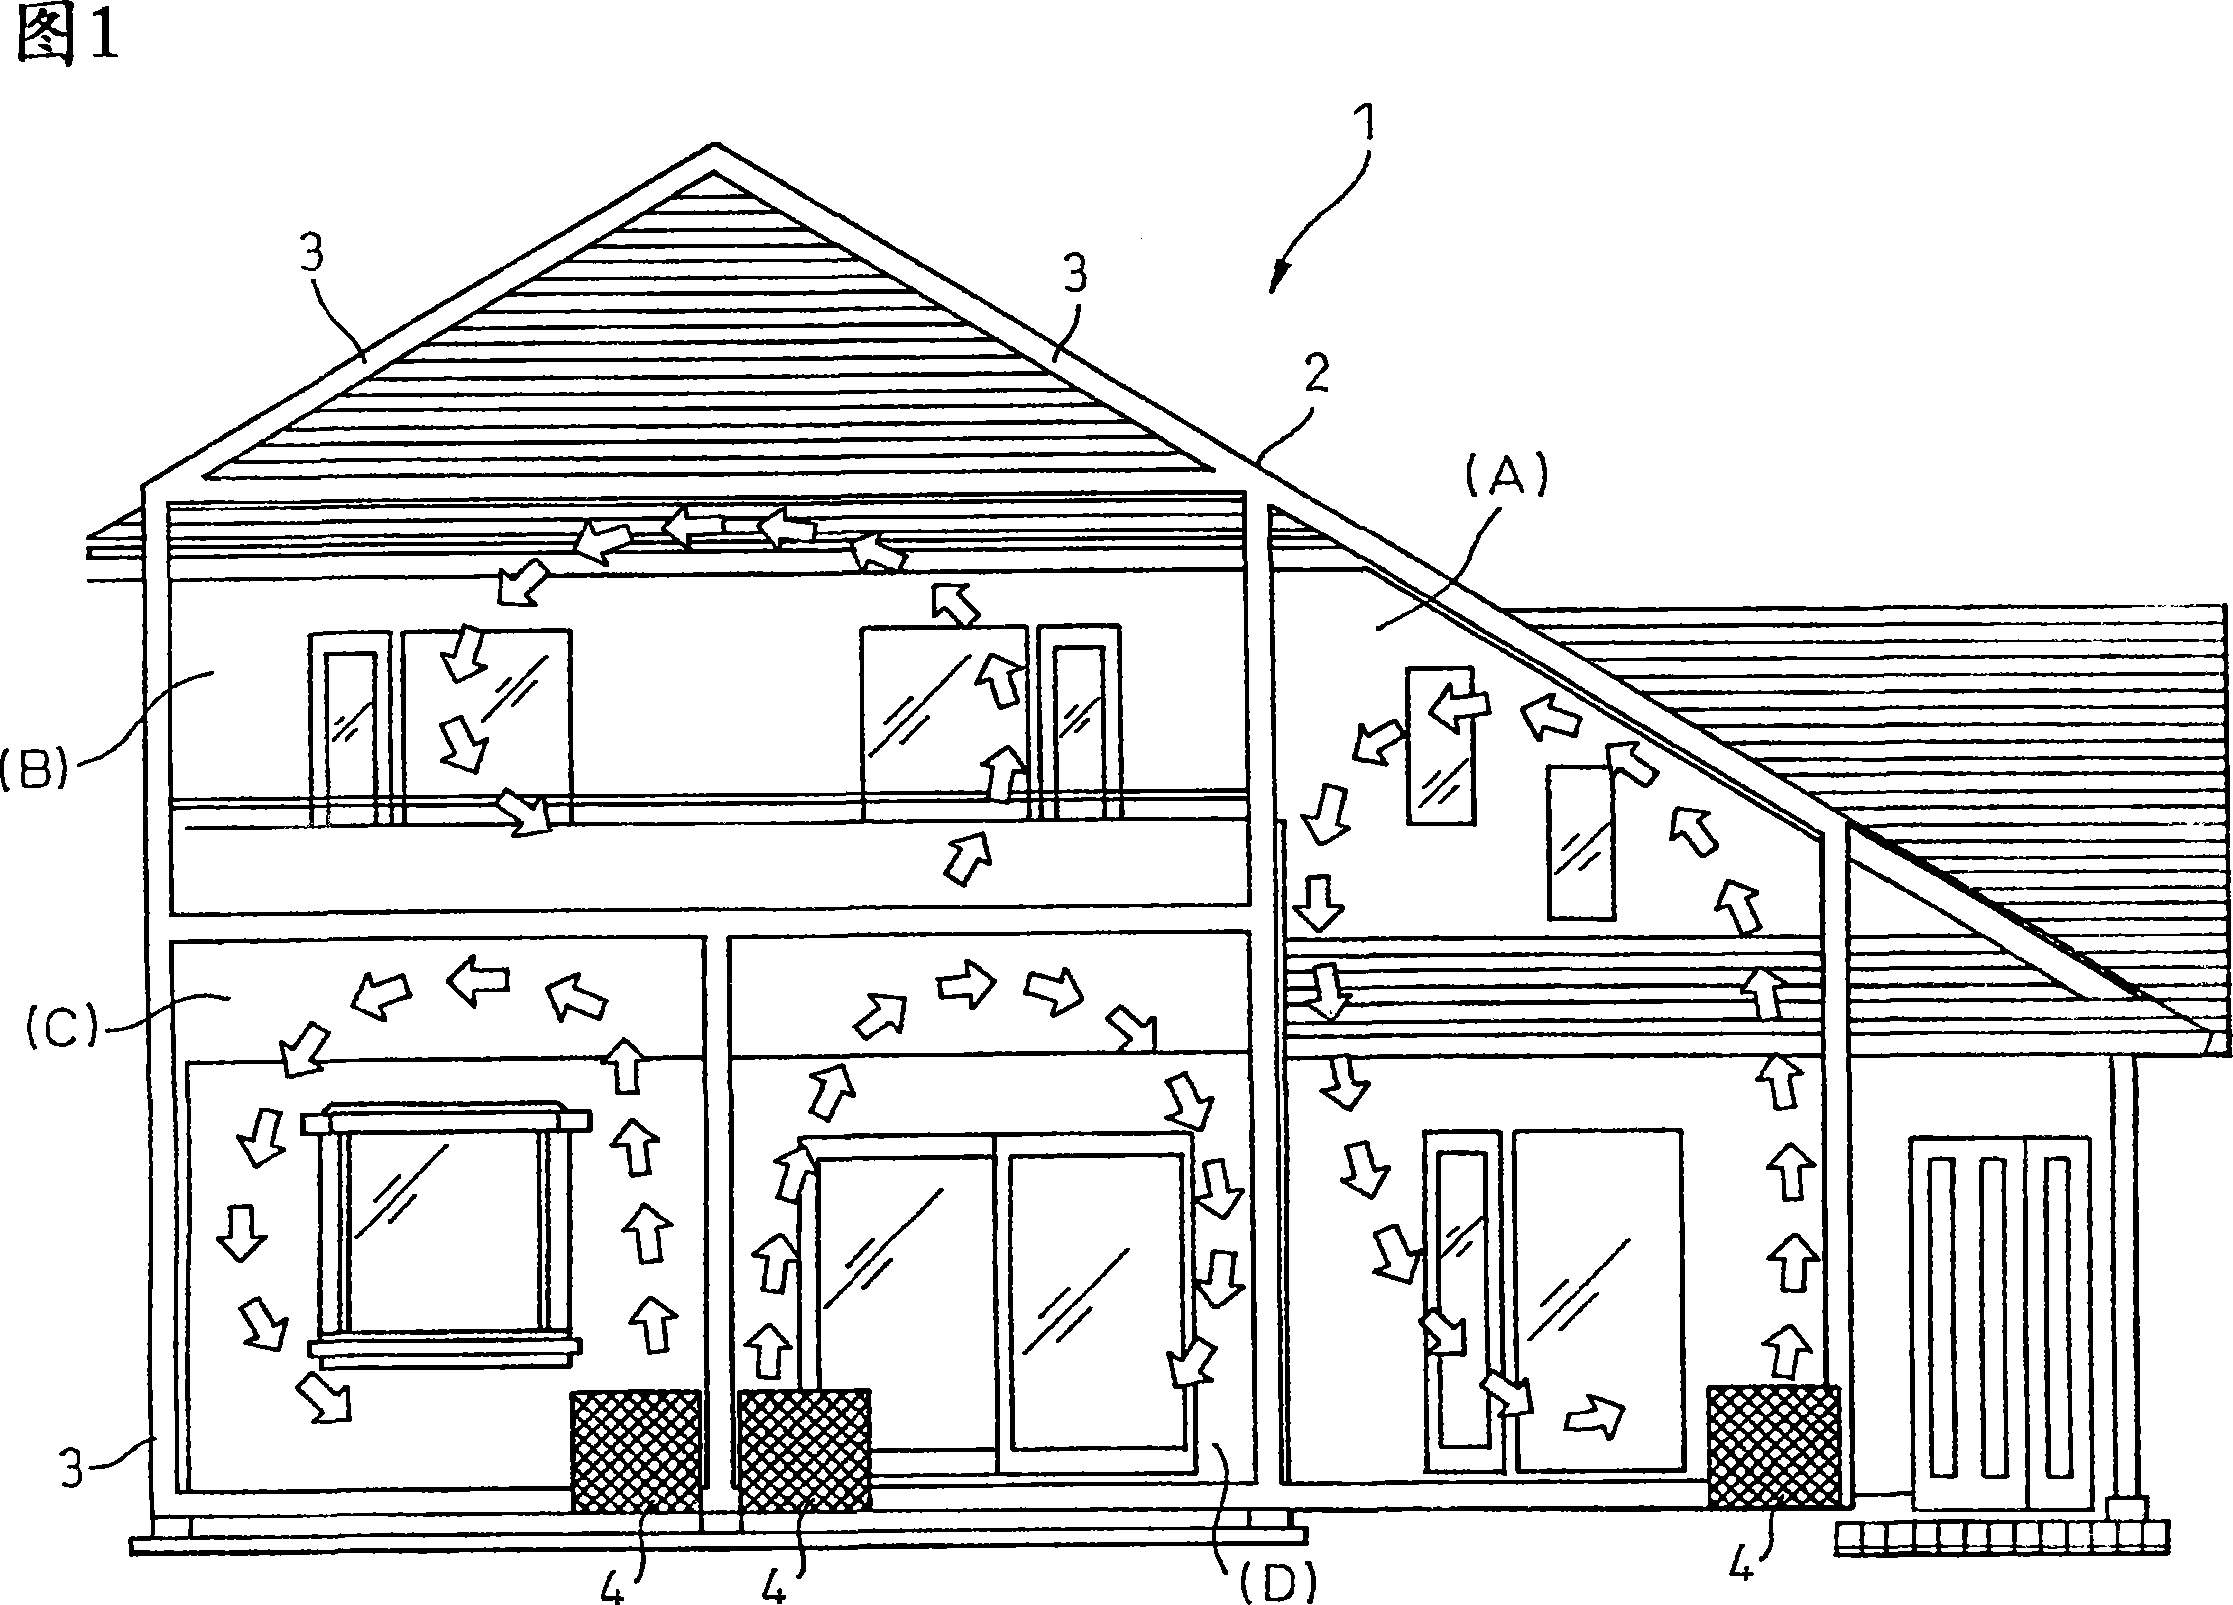 Method of constructing steel house for uniformizing hot environment therein